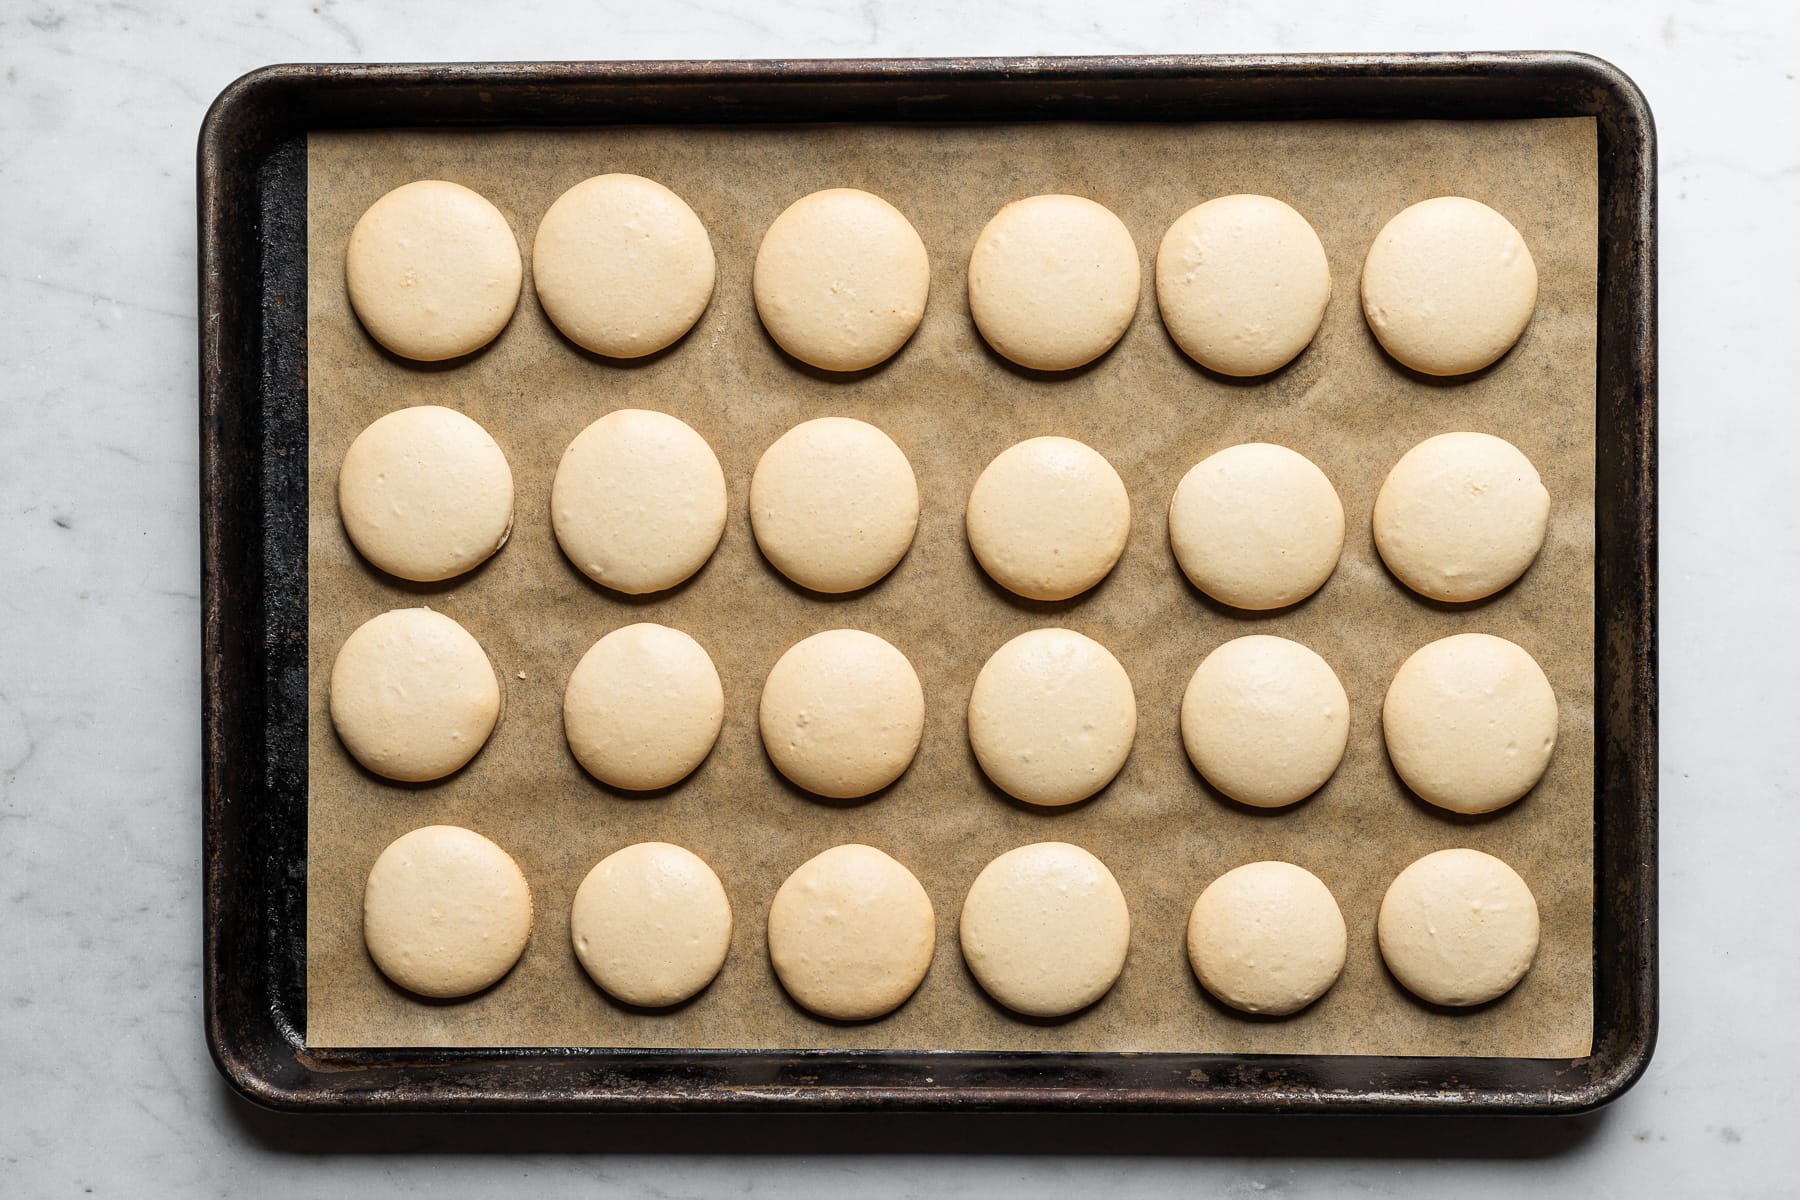 A process photo showing baked macaron shells on a parchment lined baking sheet. The baking sheet rests on a white marble background.